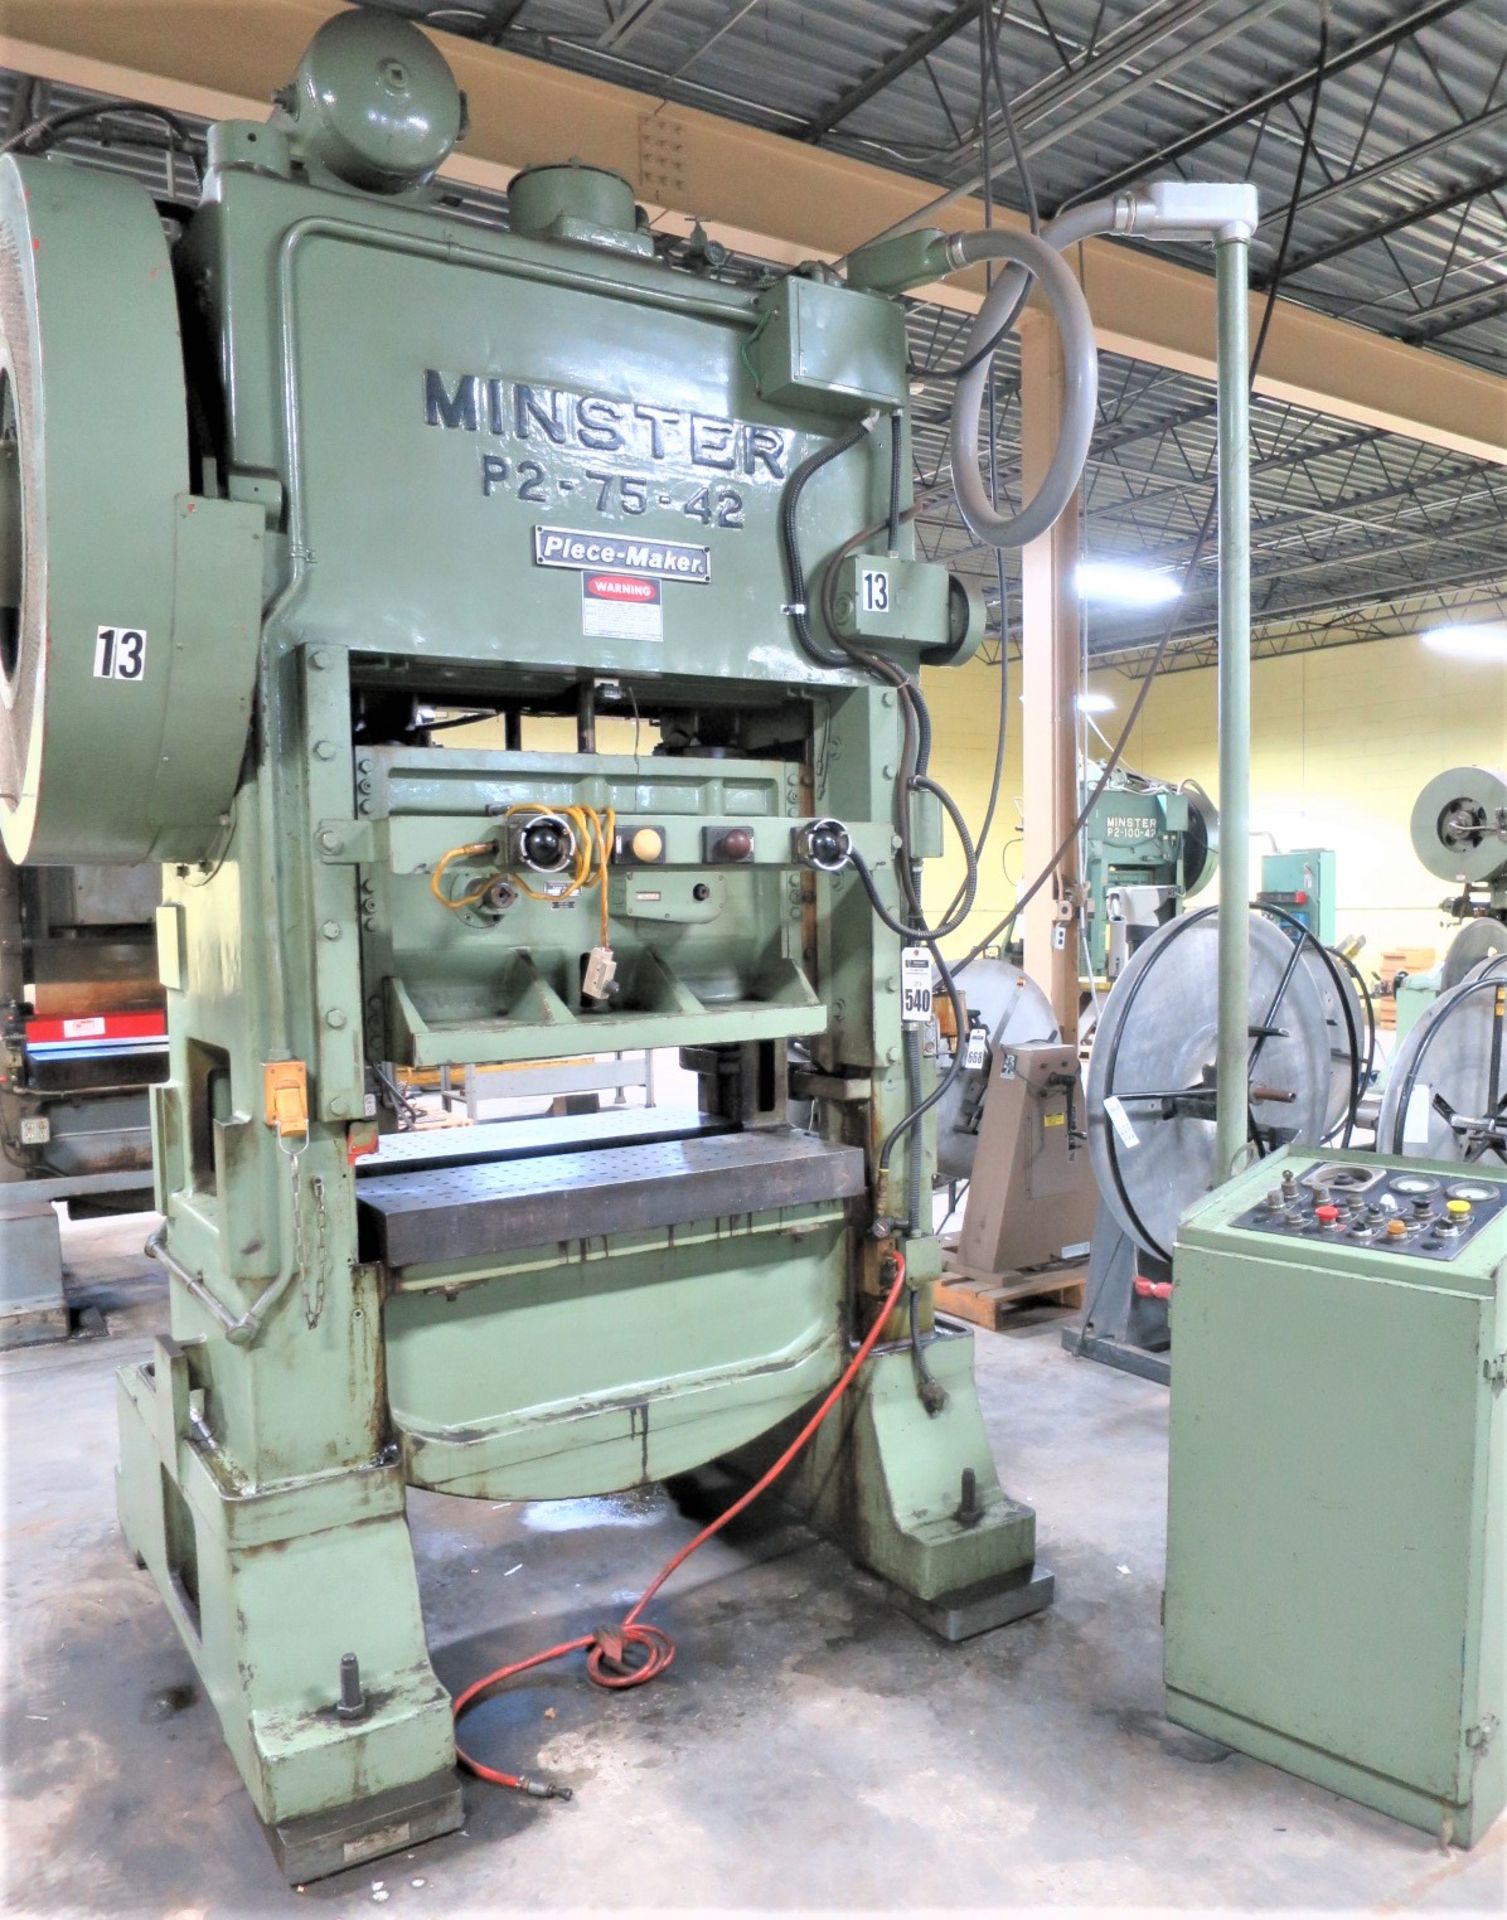 Minster 75 Ton Piece-Maker Variable Speed Straight Side Stamping Press Model P2-75-42, Sn P2-75-